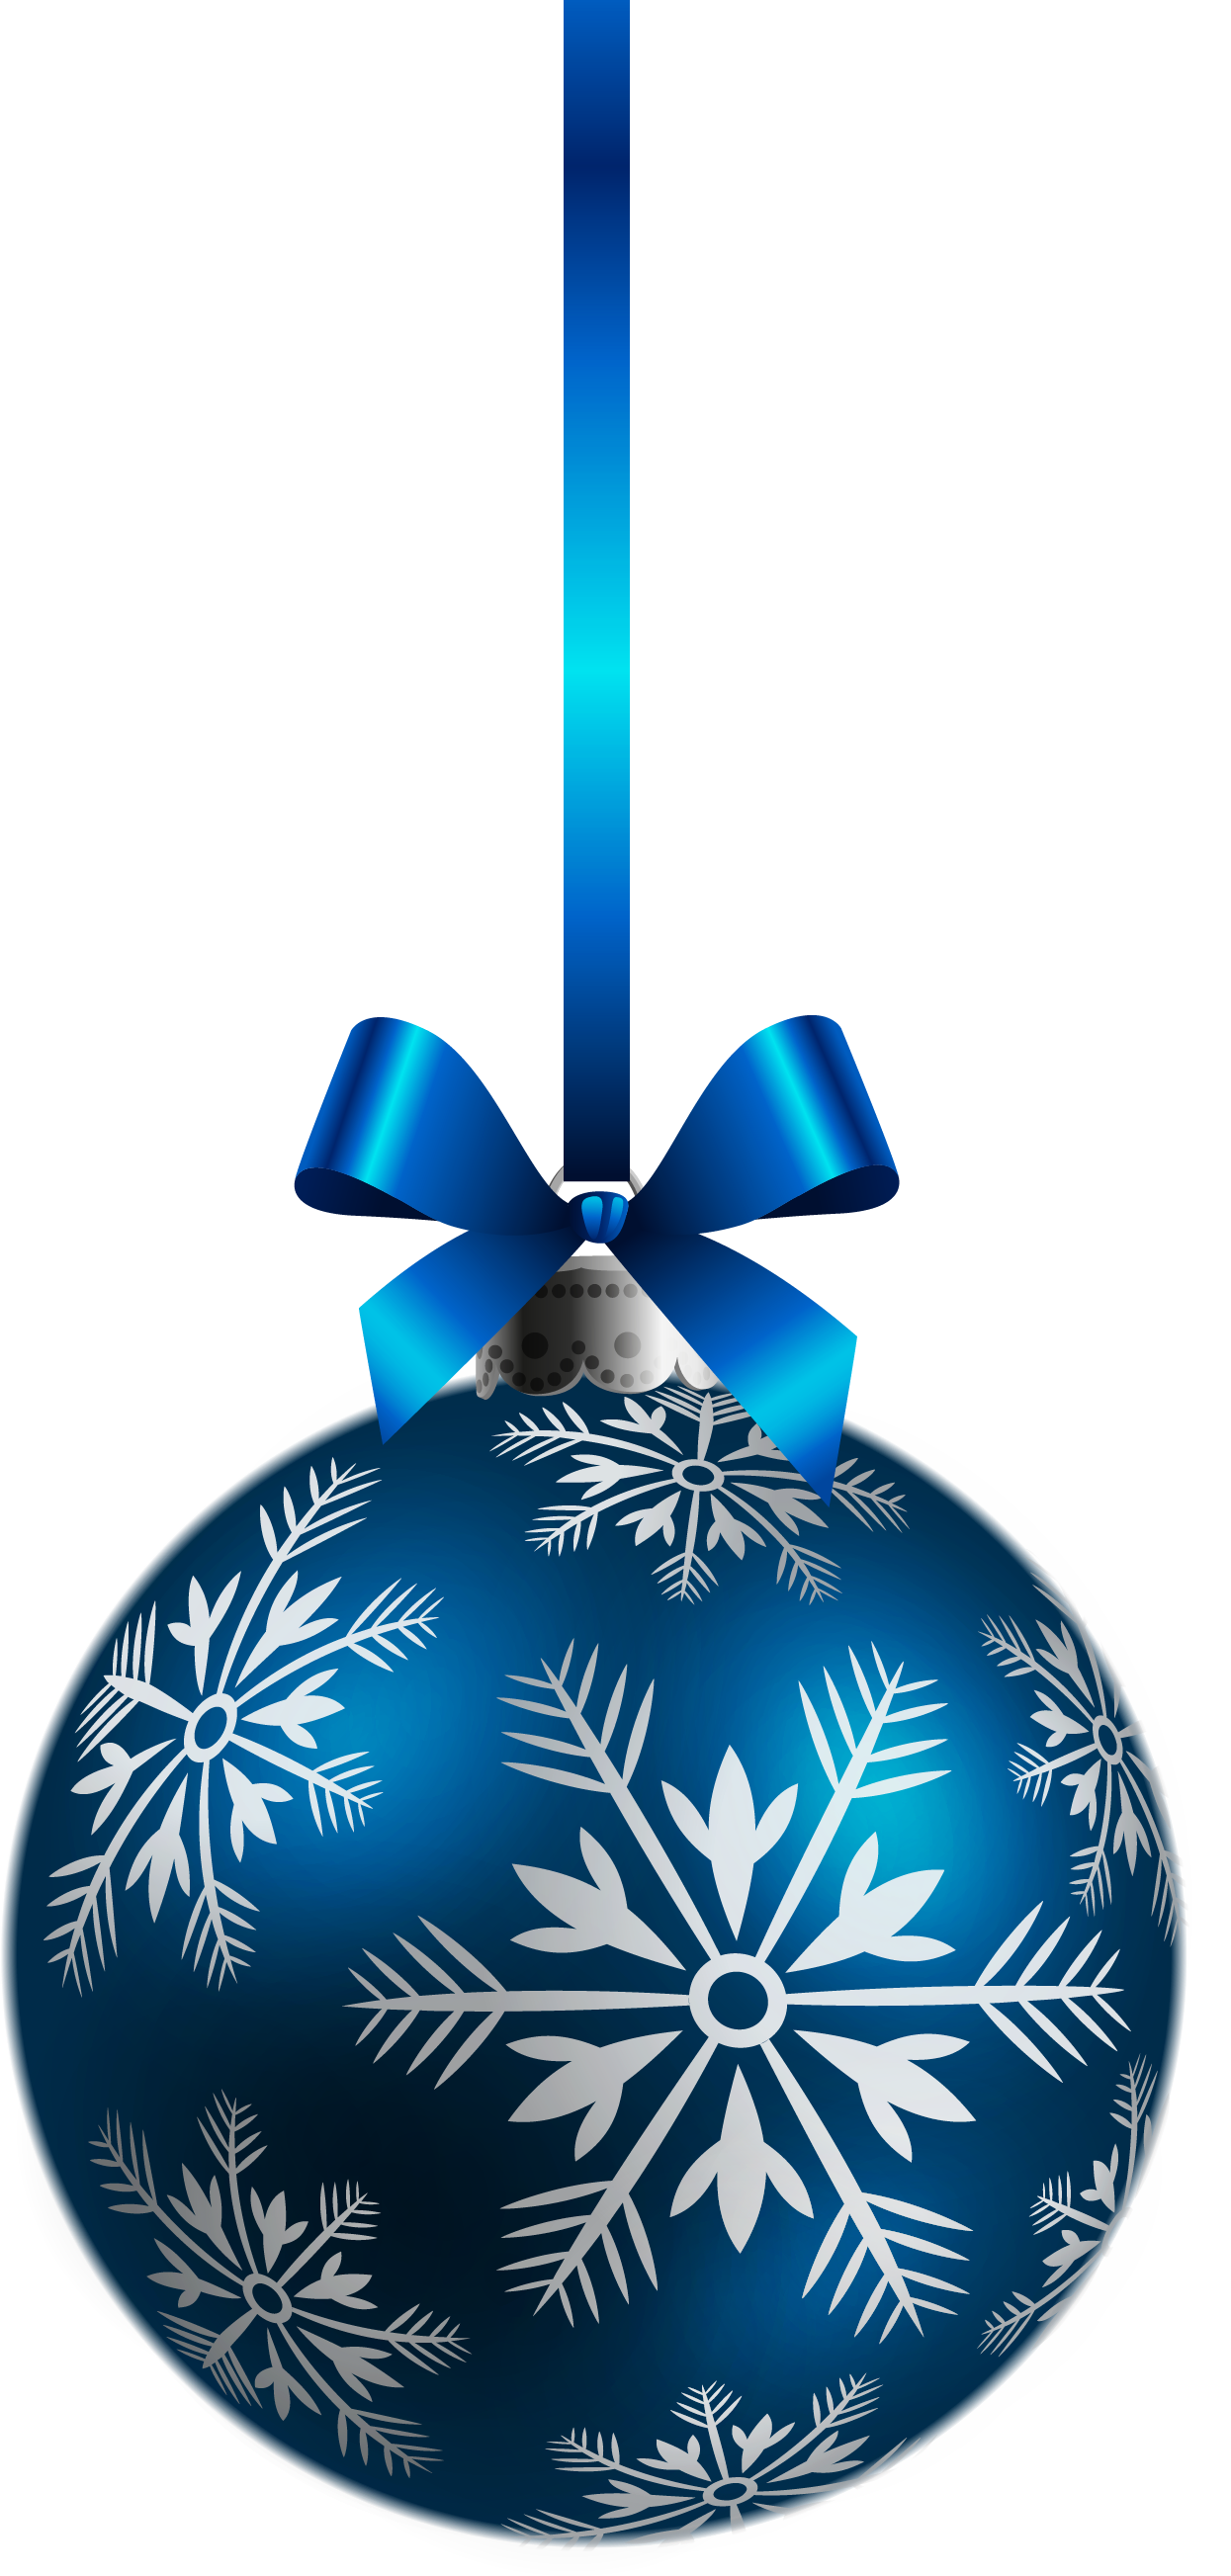 Blue holiday ornament with white snowflakes 